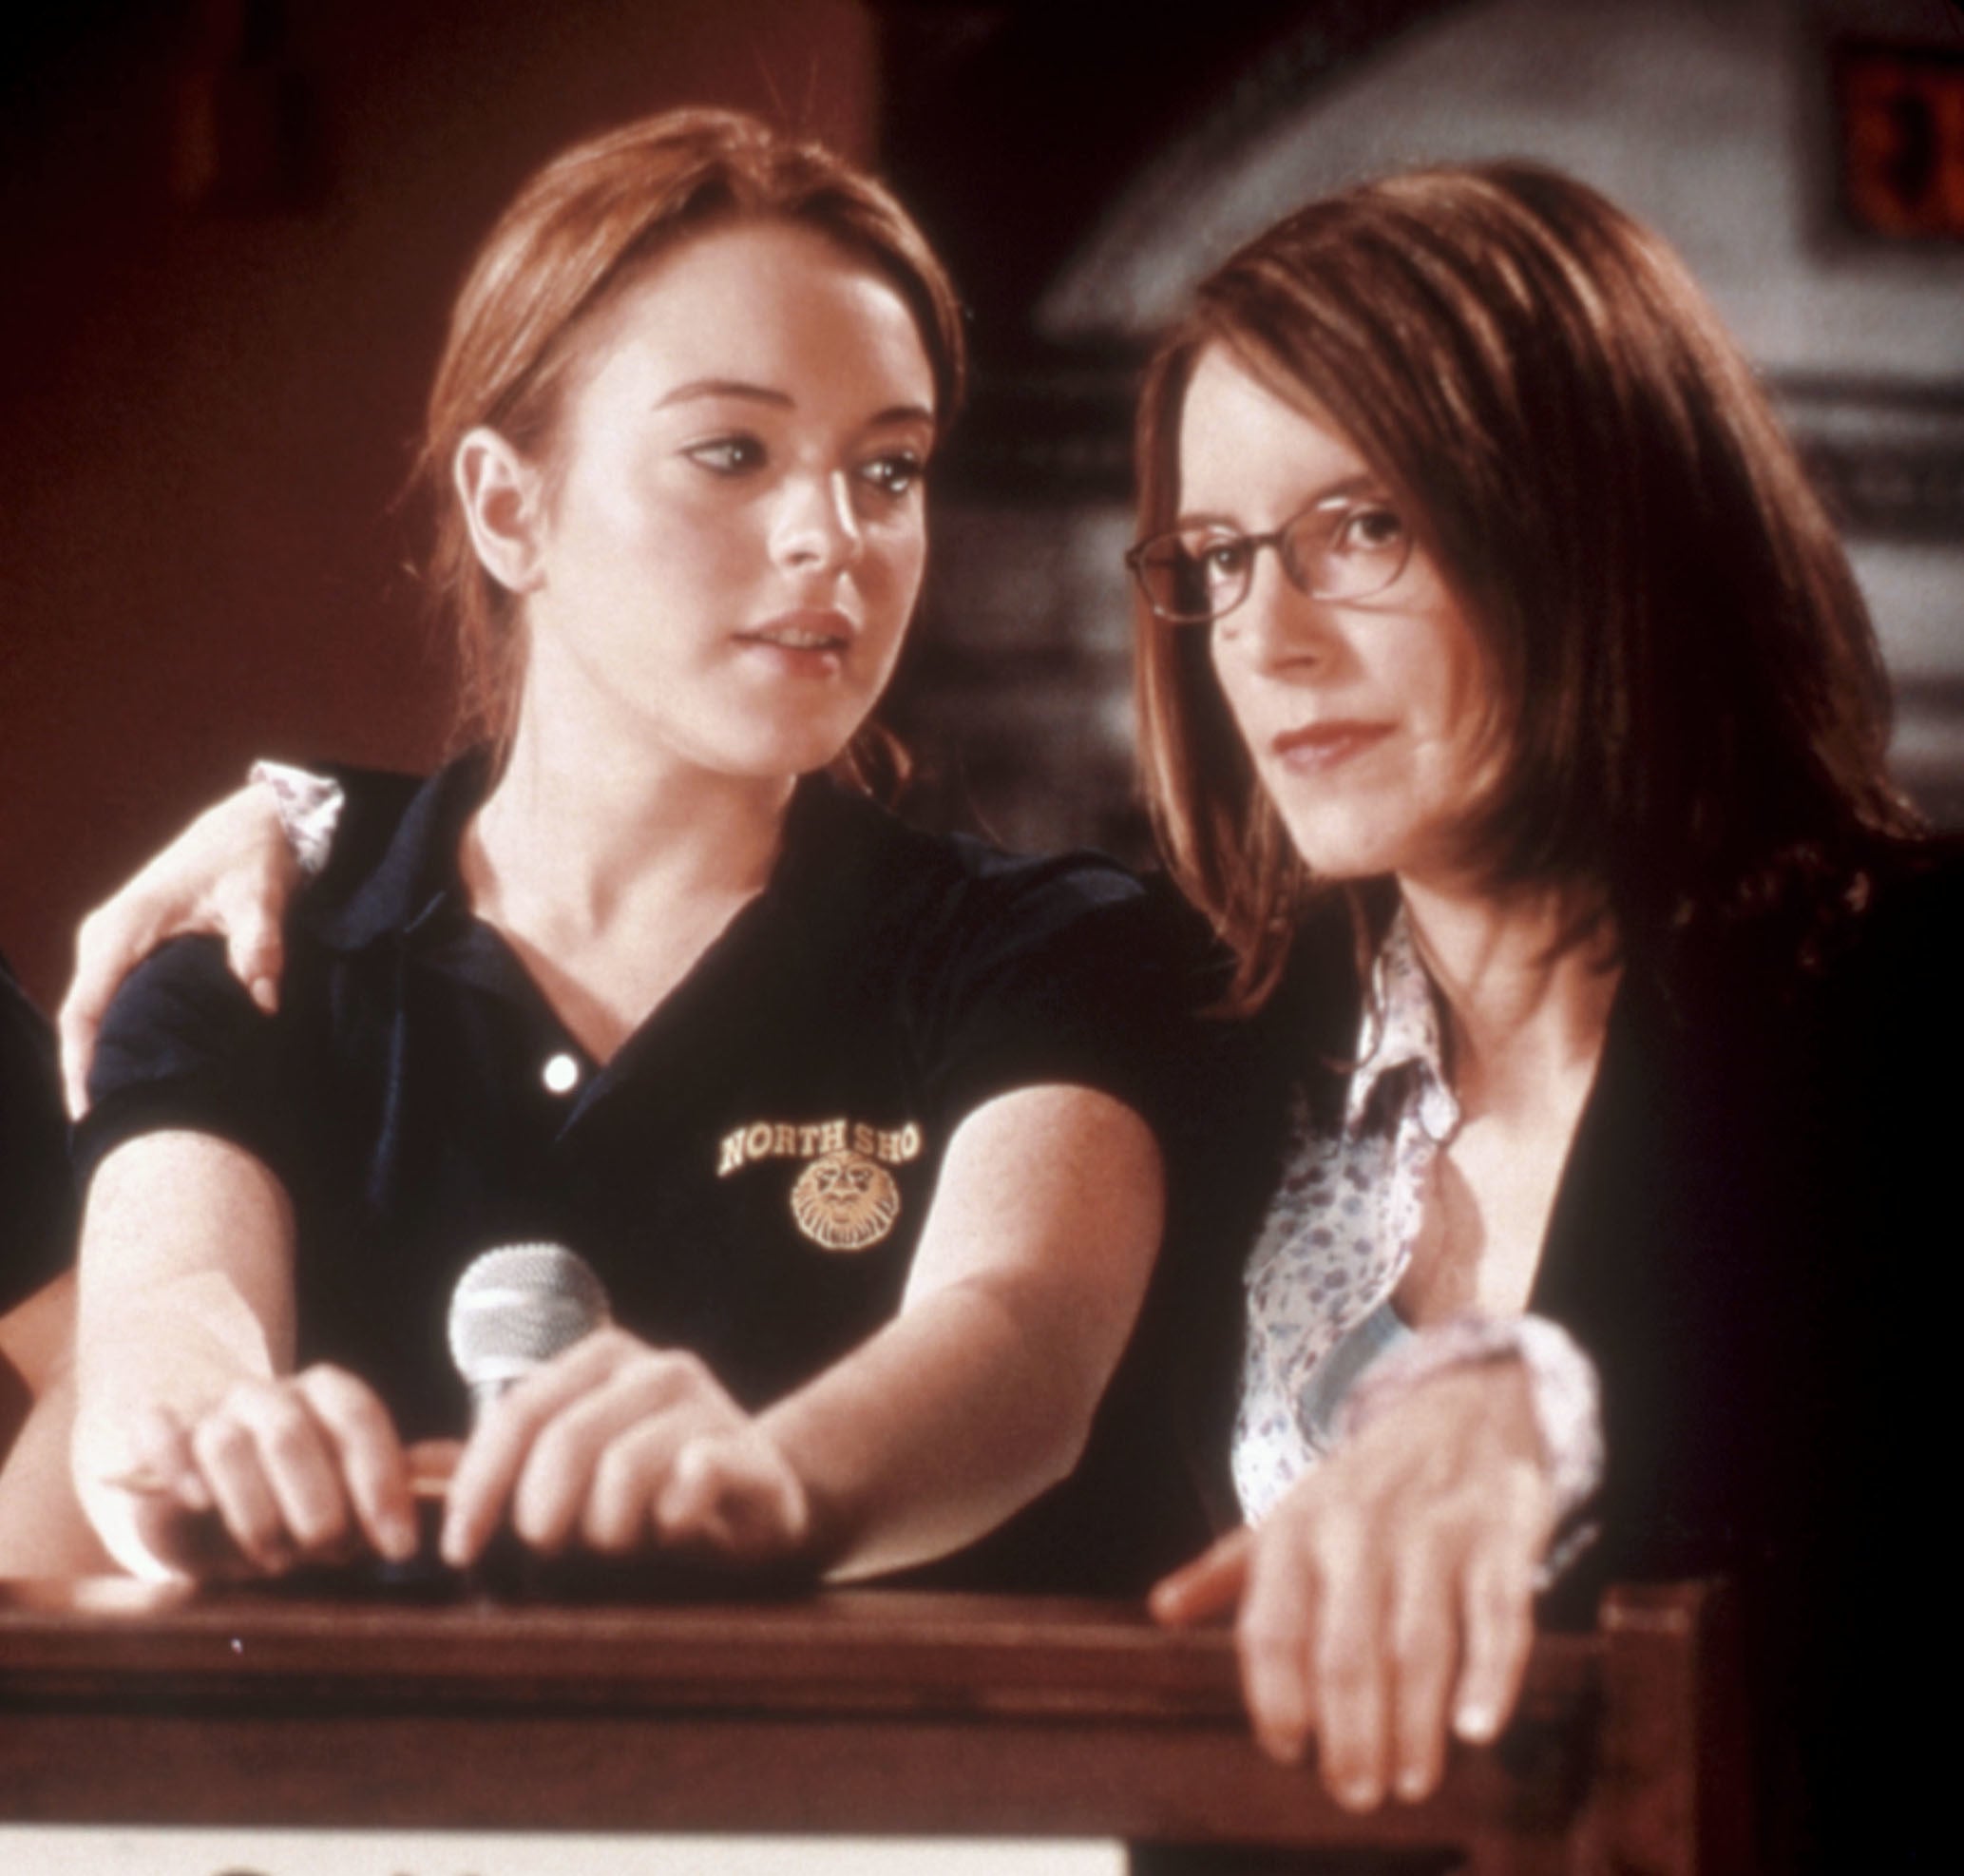 Lindsay and Tina in the movie